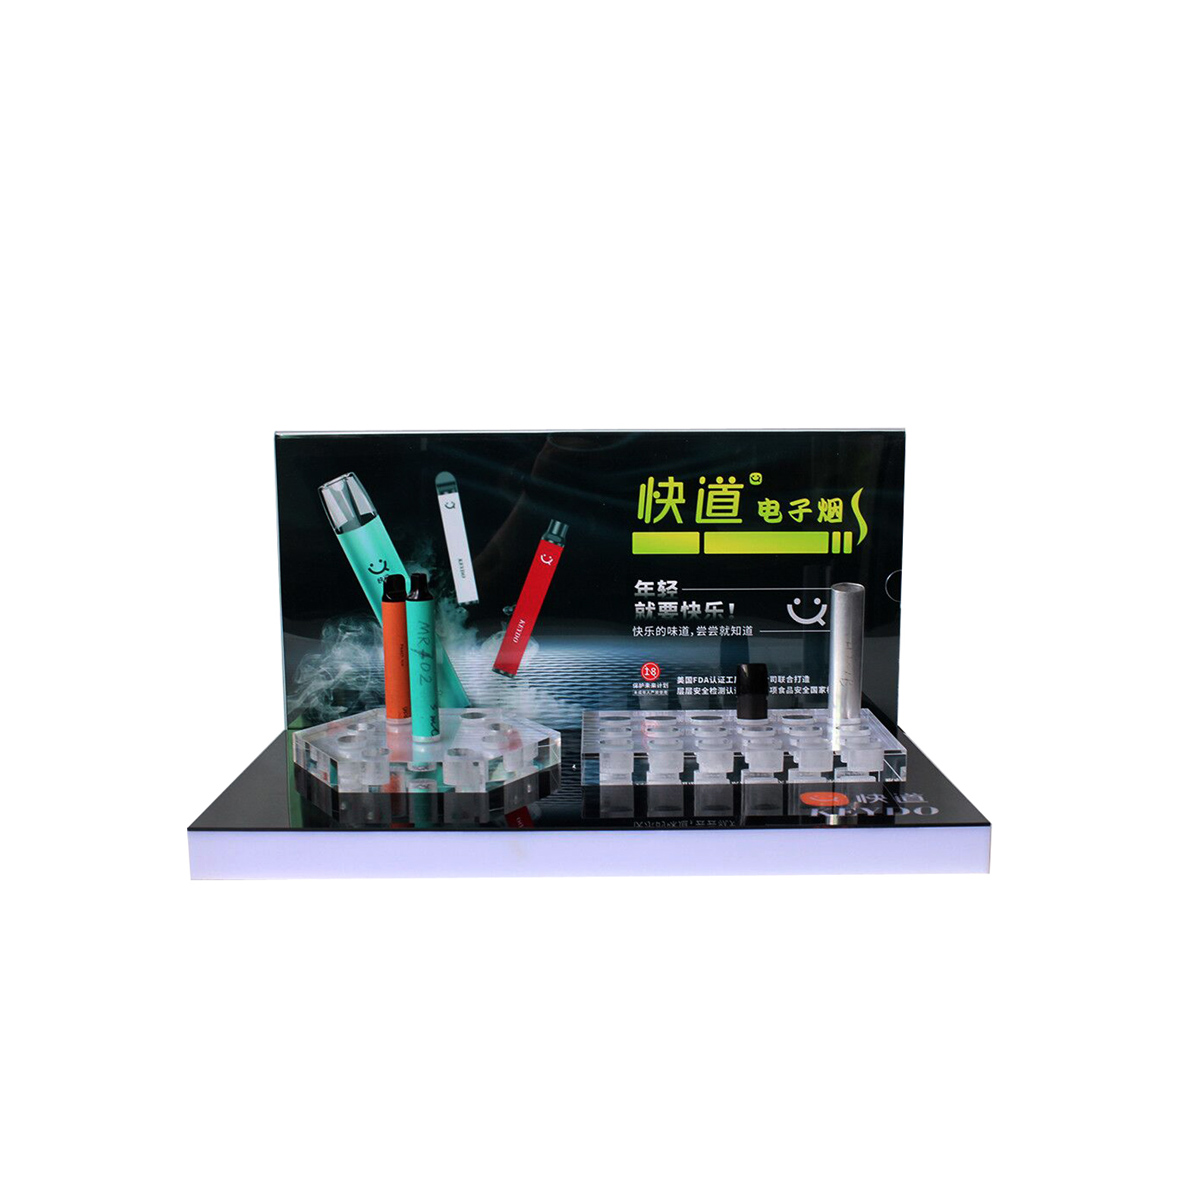 The Lighted Acrylic Electronic Cigarette Display Stand